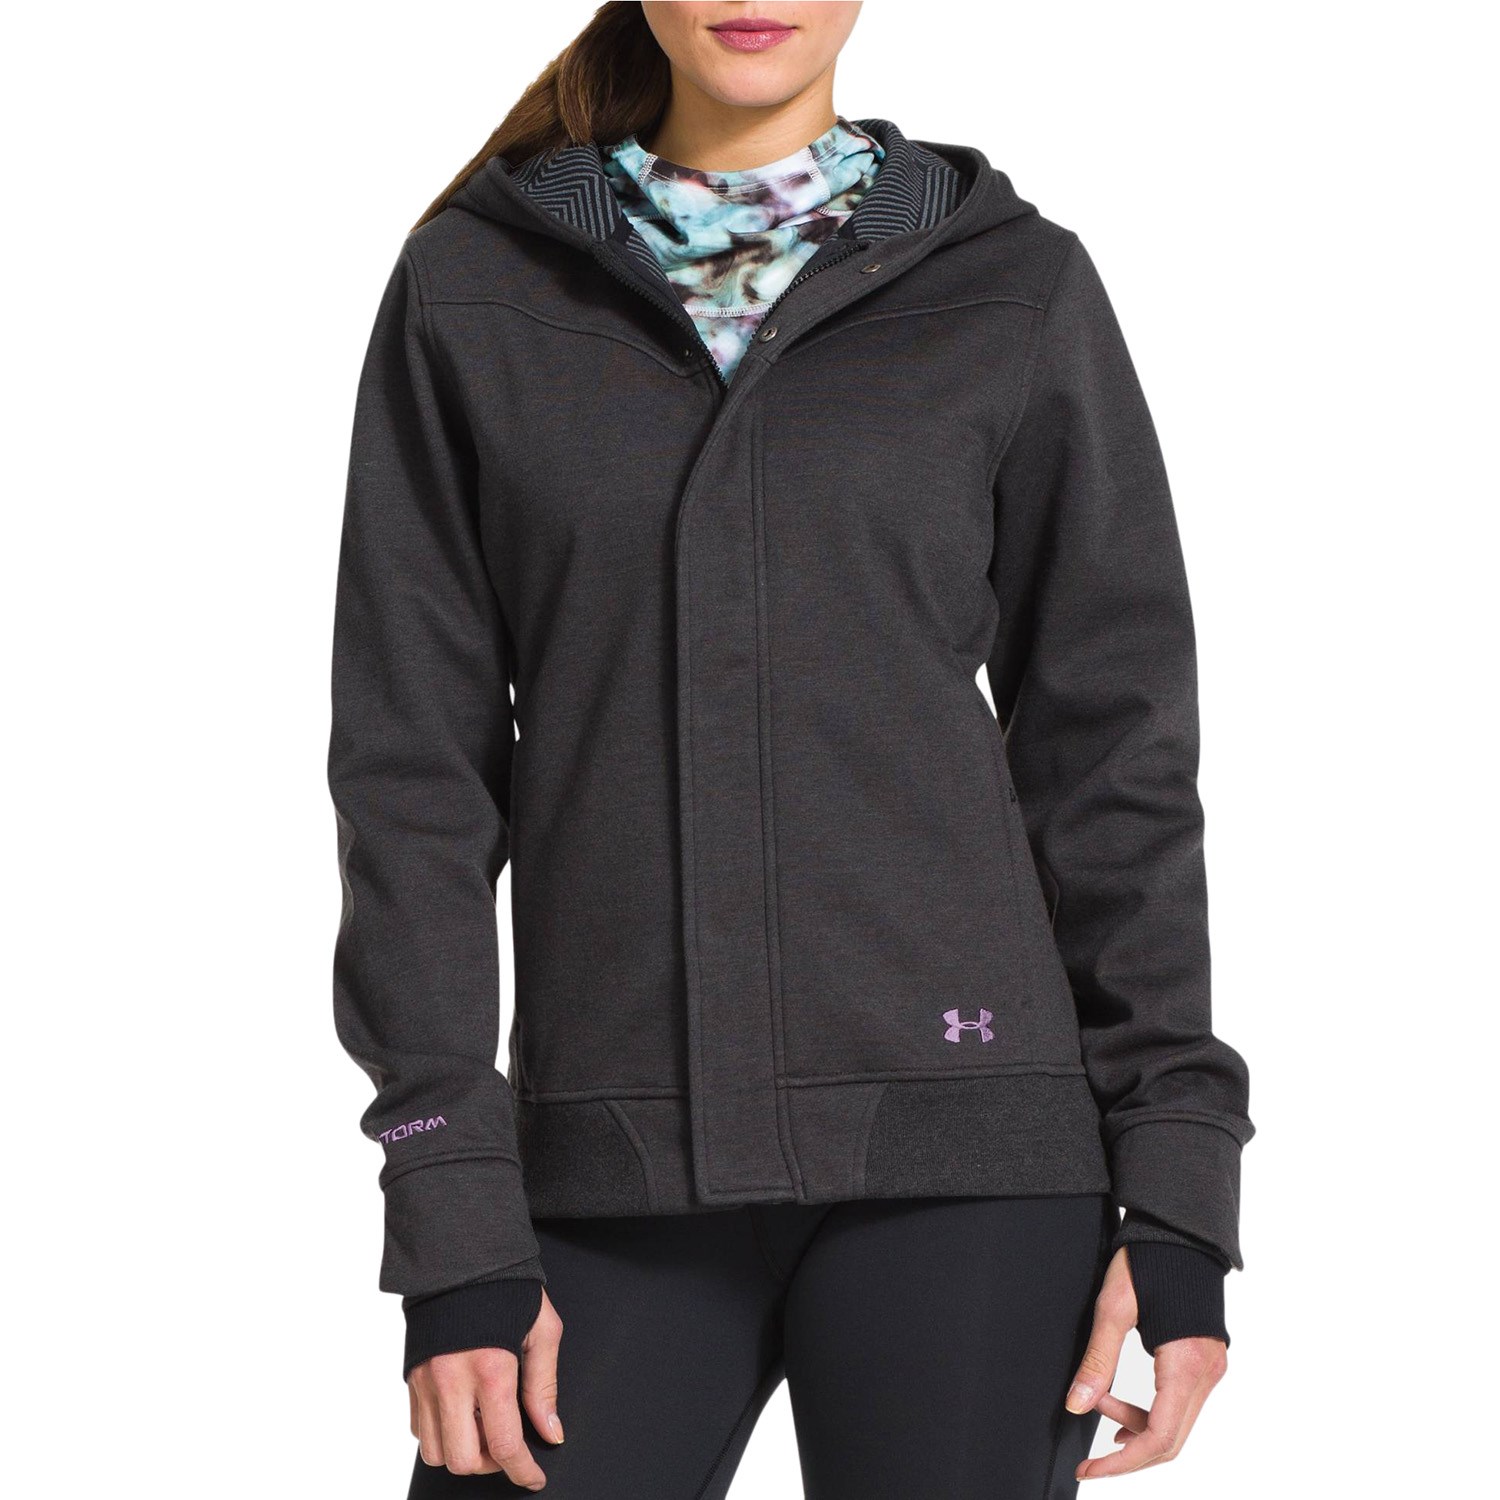 Under Armour Women's ColdGear® Infrared® Pullover Hoodie, Anti-Odor